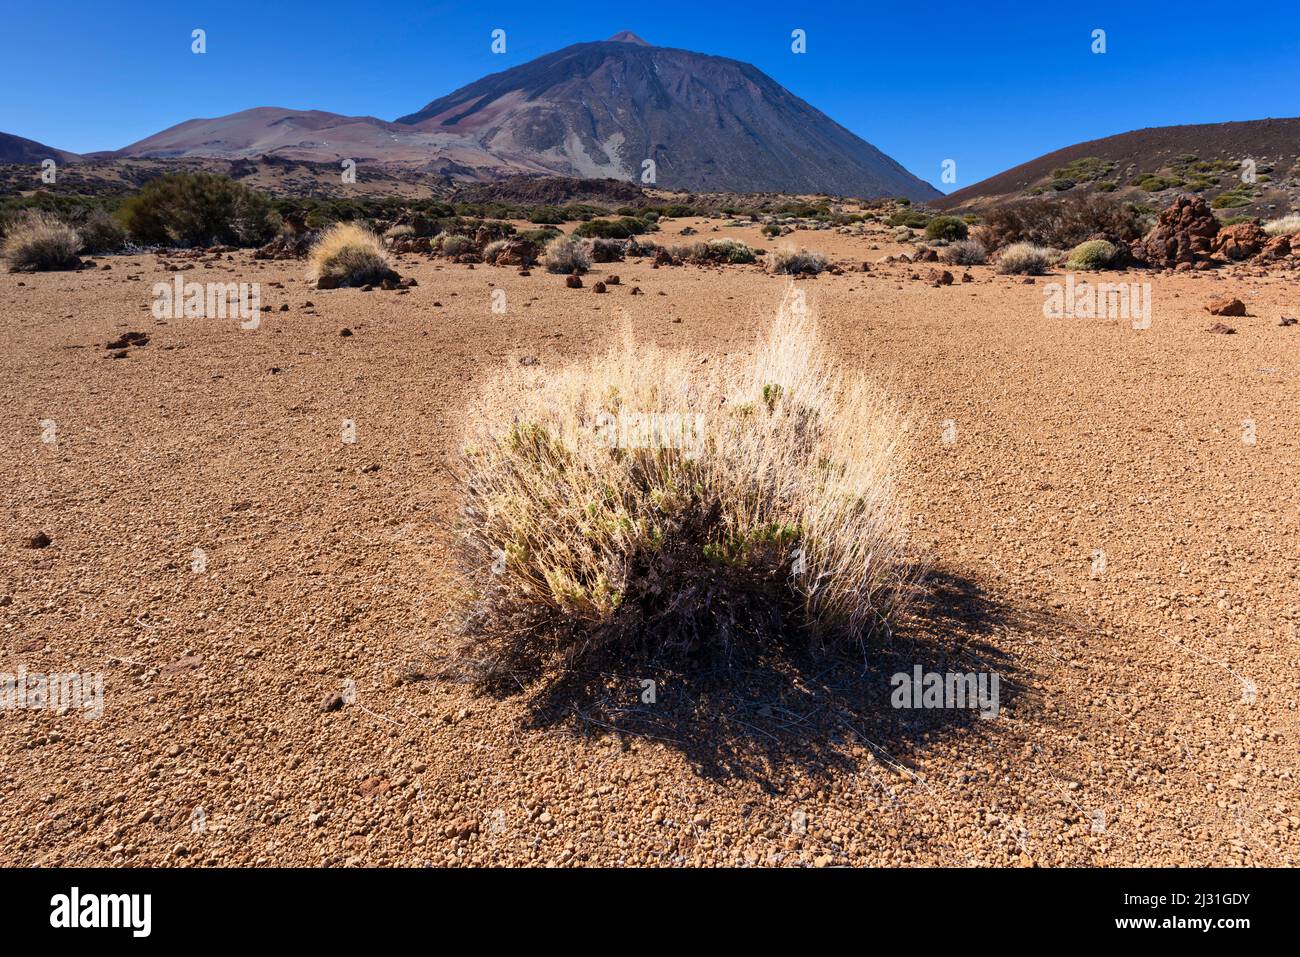 El Teide National Park, behind it the Pico del Teide, 3715m, World Heritage Site, Tenerife, Canary Islands, Spain, Europe Stock Photo